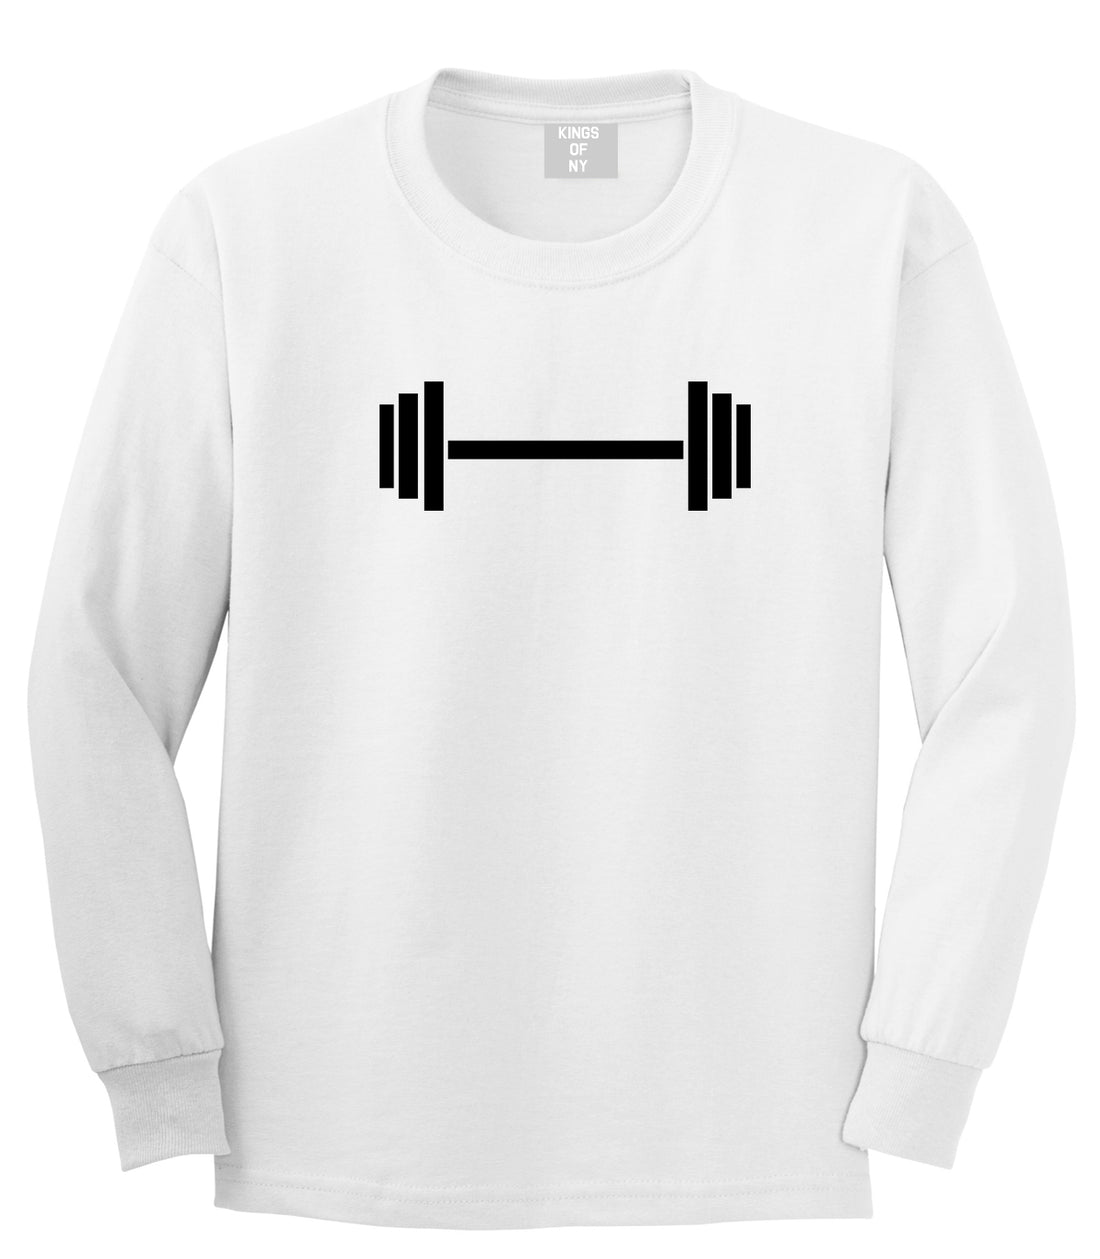 Barbell Workout Gym White Long Sleeve T-Shirt by Kings Of NY